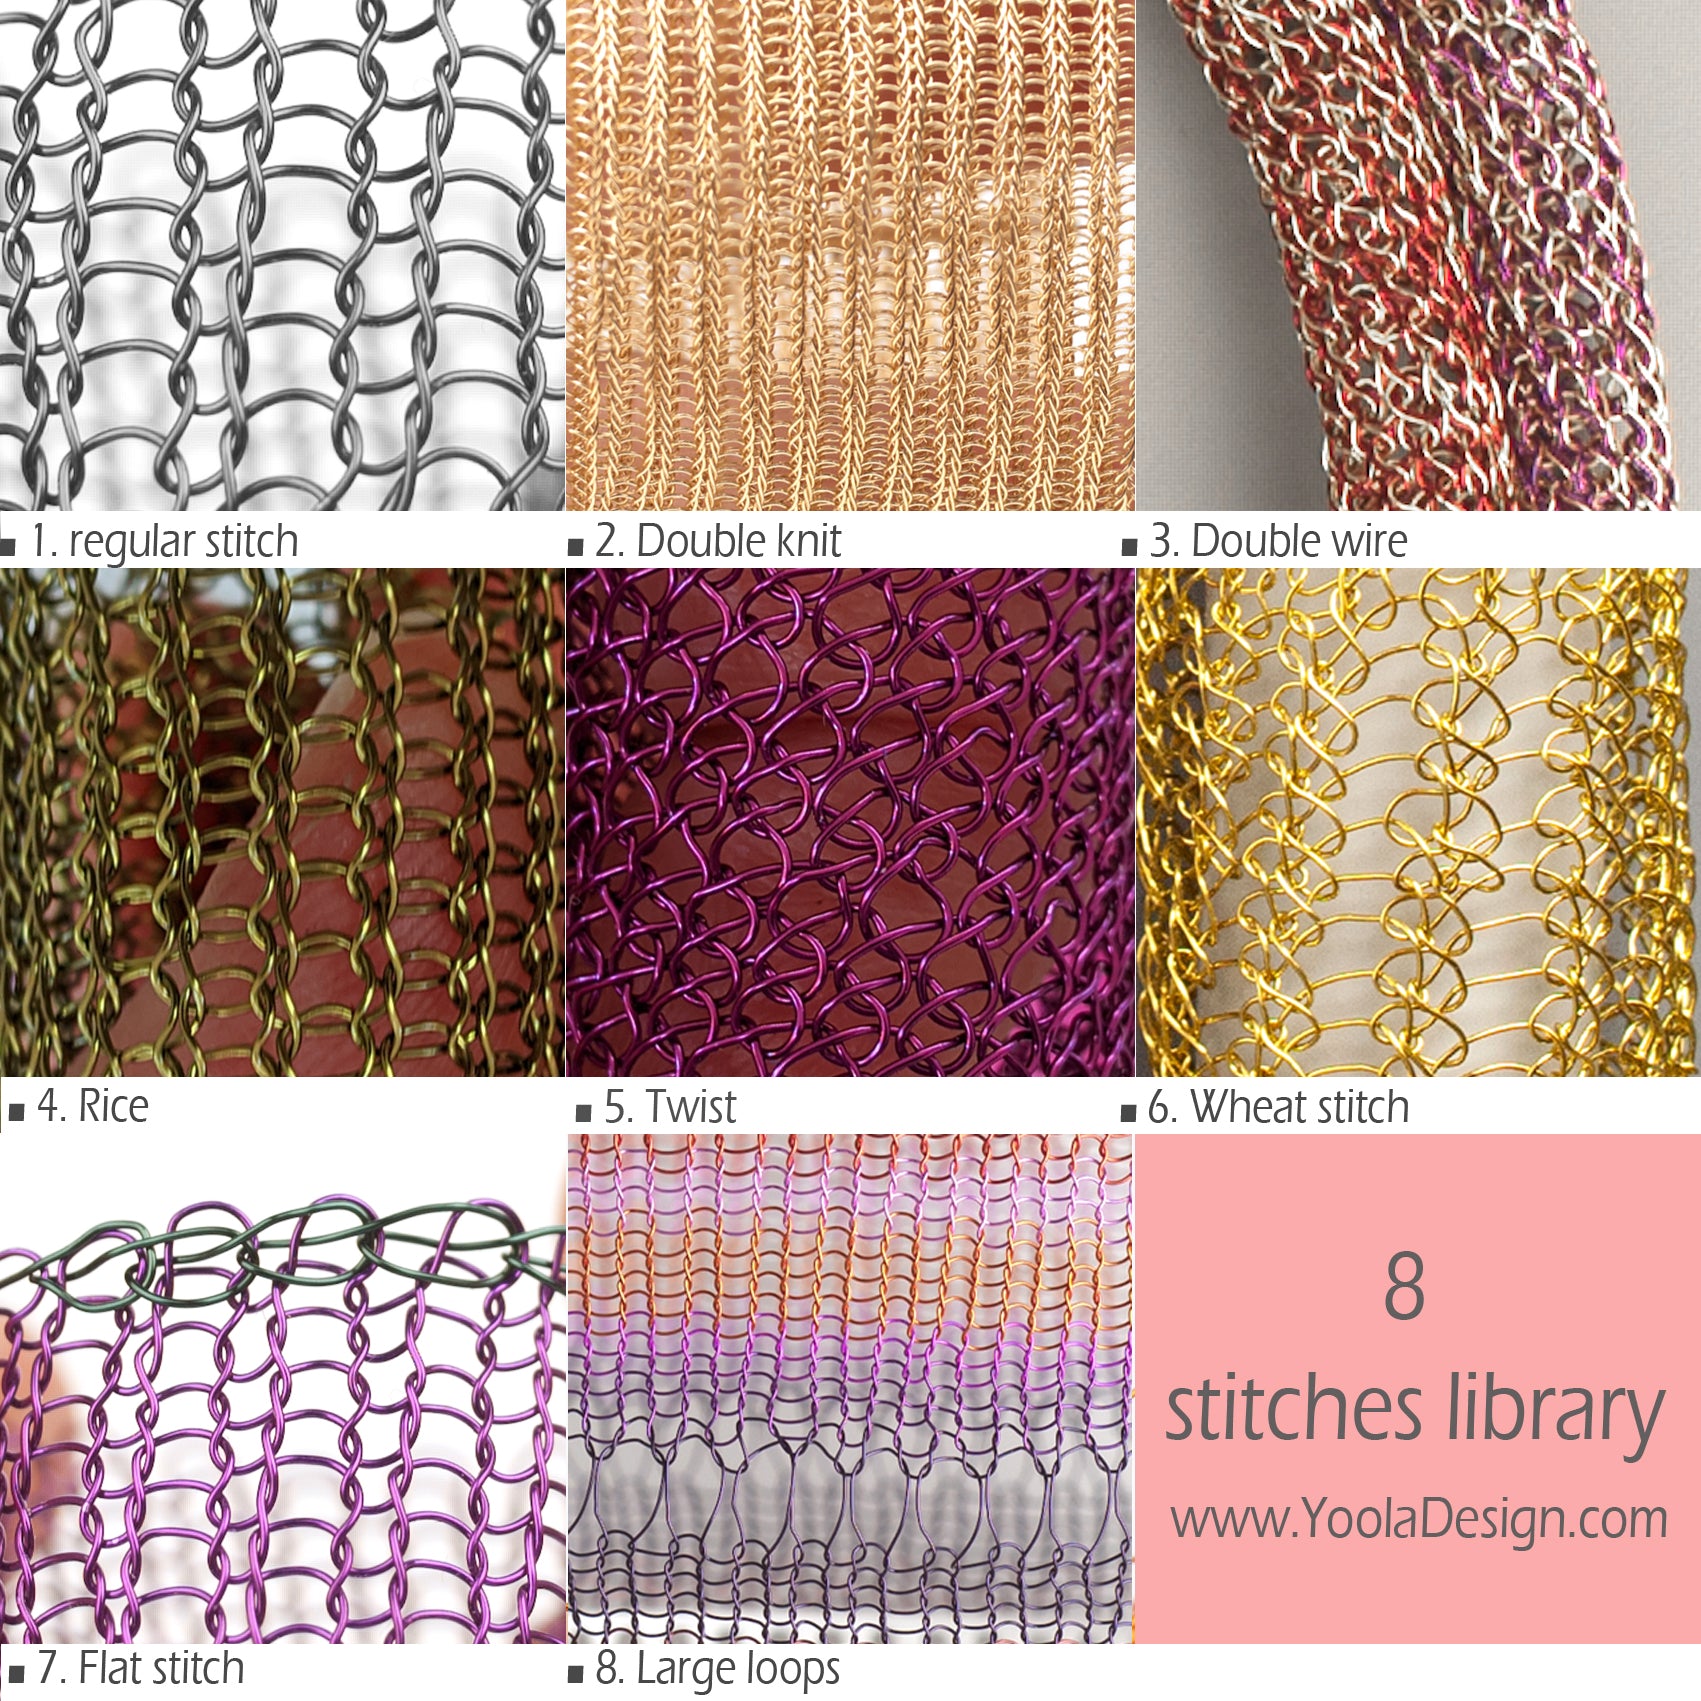 From the Stitch LibraryHow to Use a French Knitter 